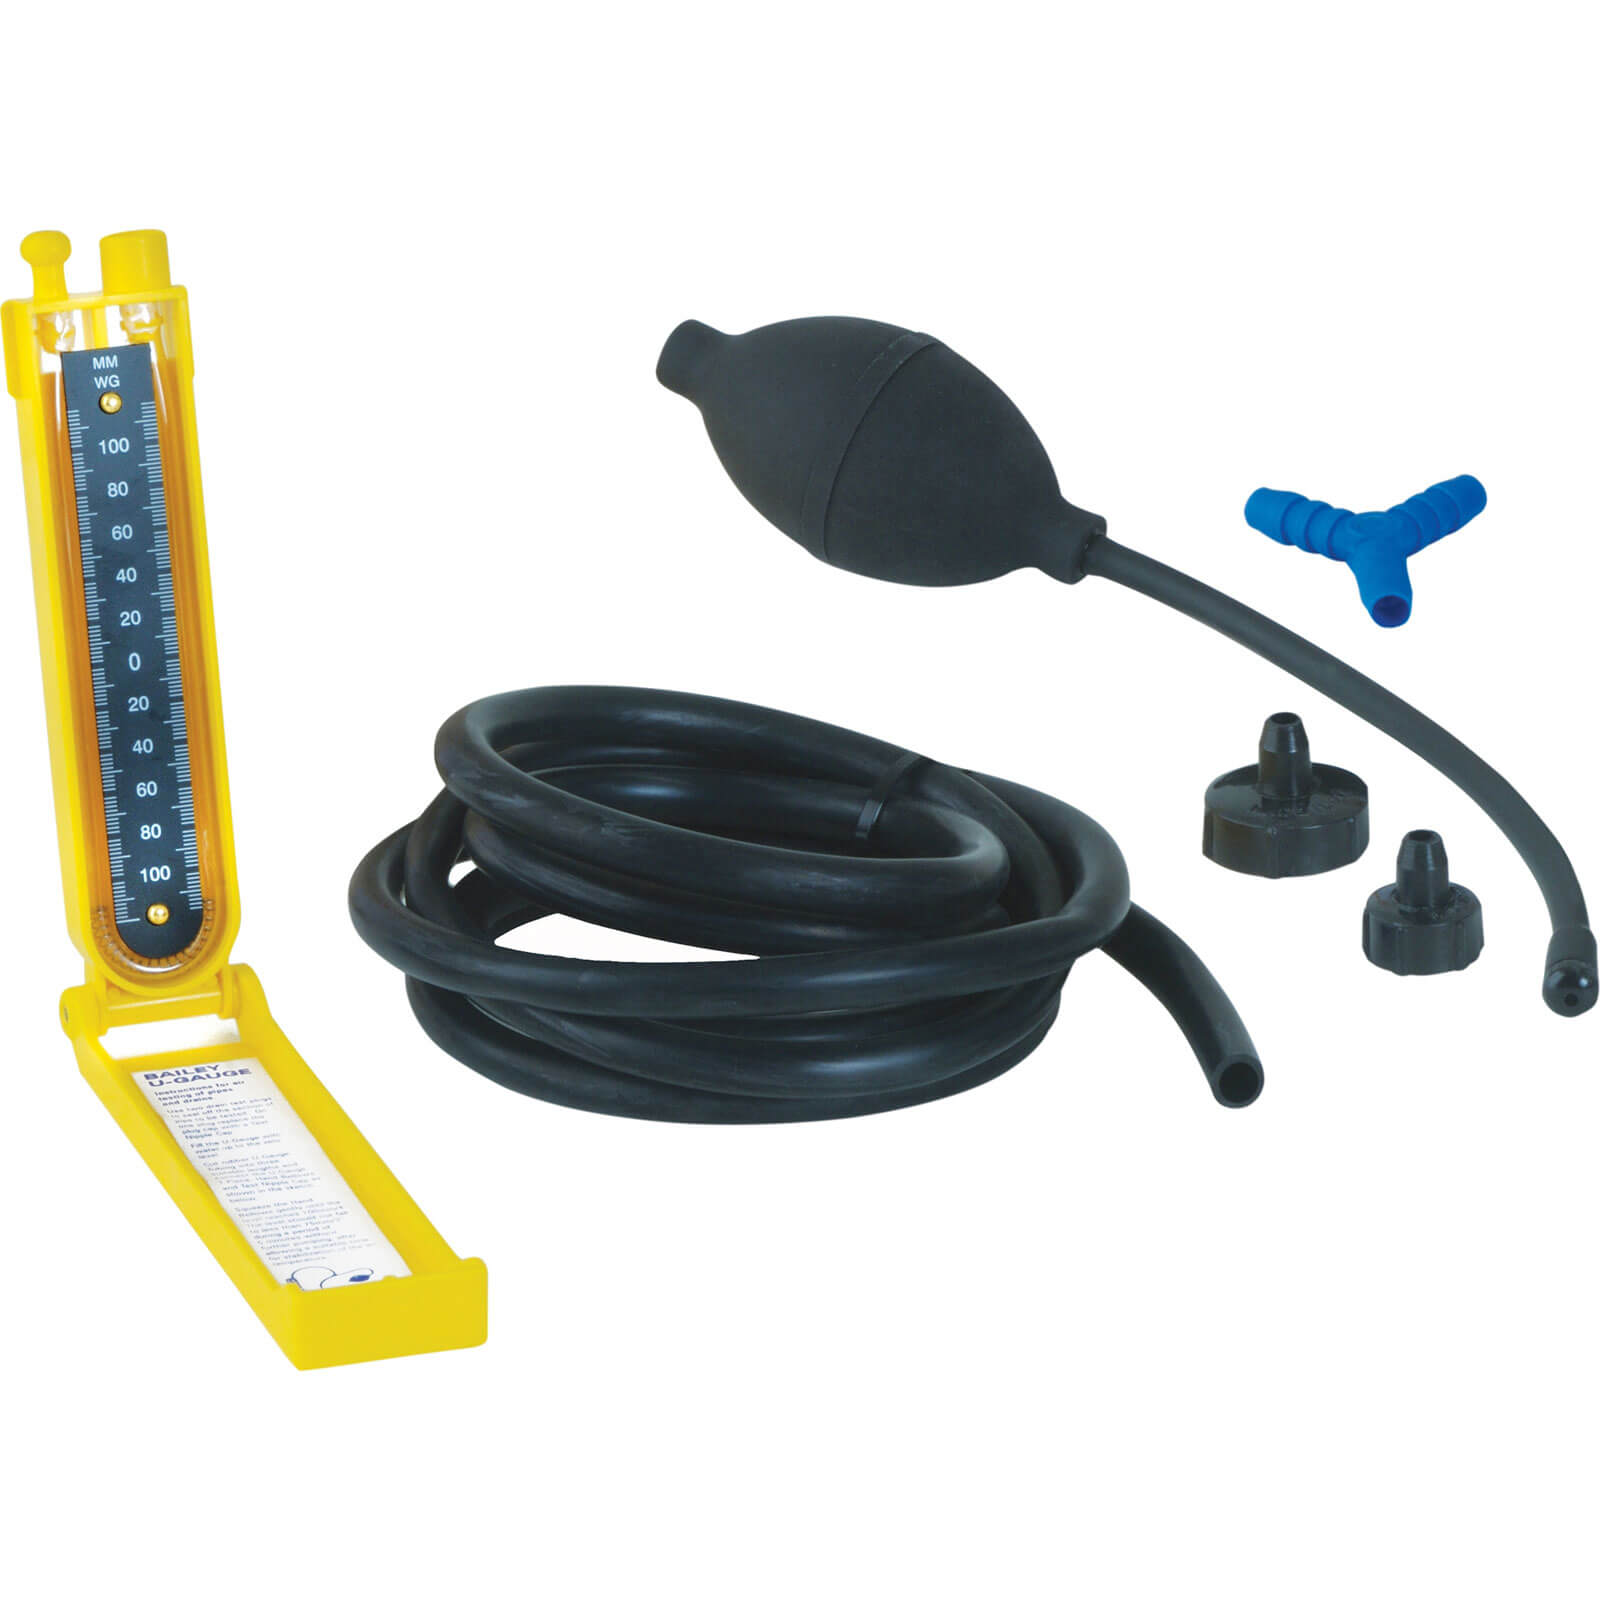 Image of Bailey 4074 Complete Drain Test Kit